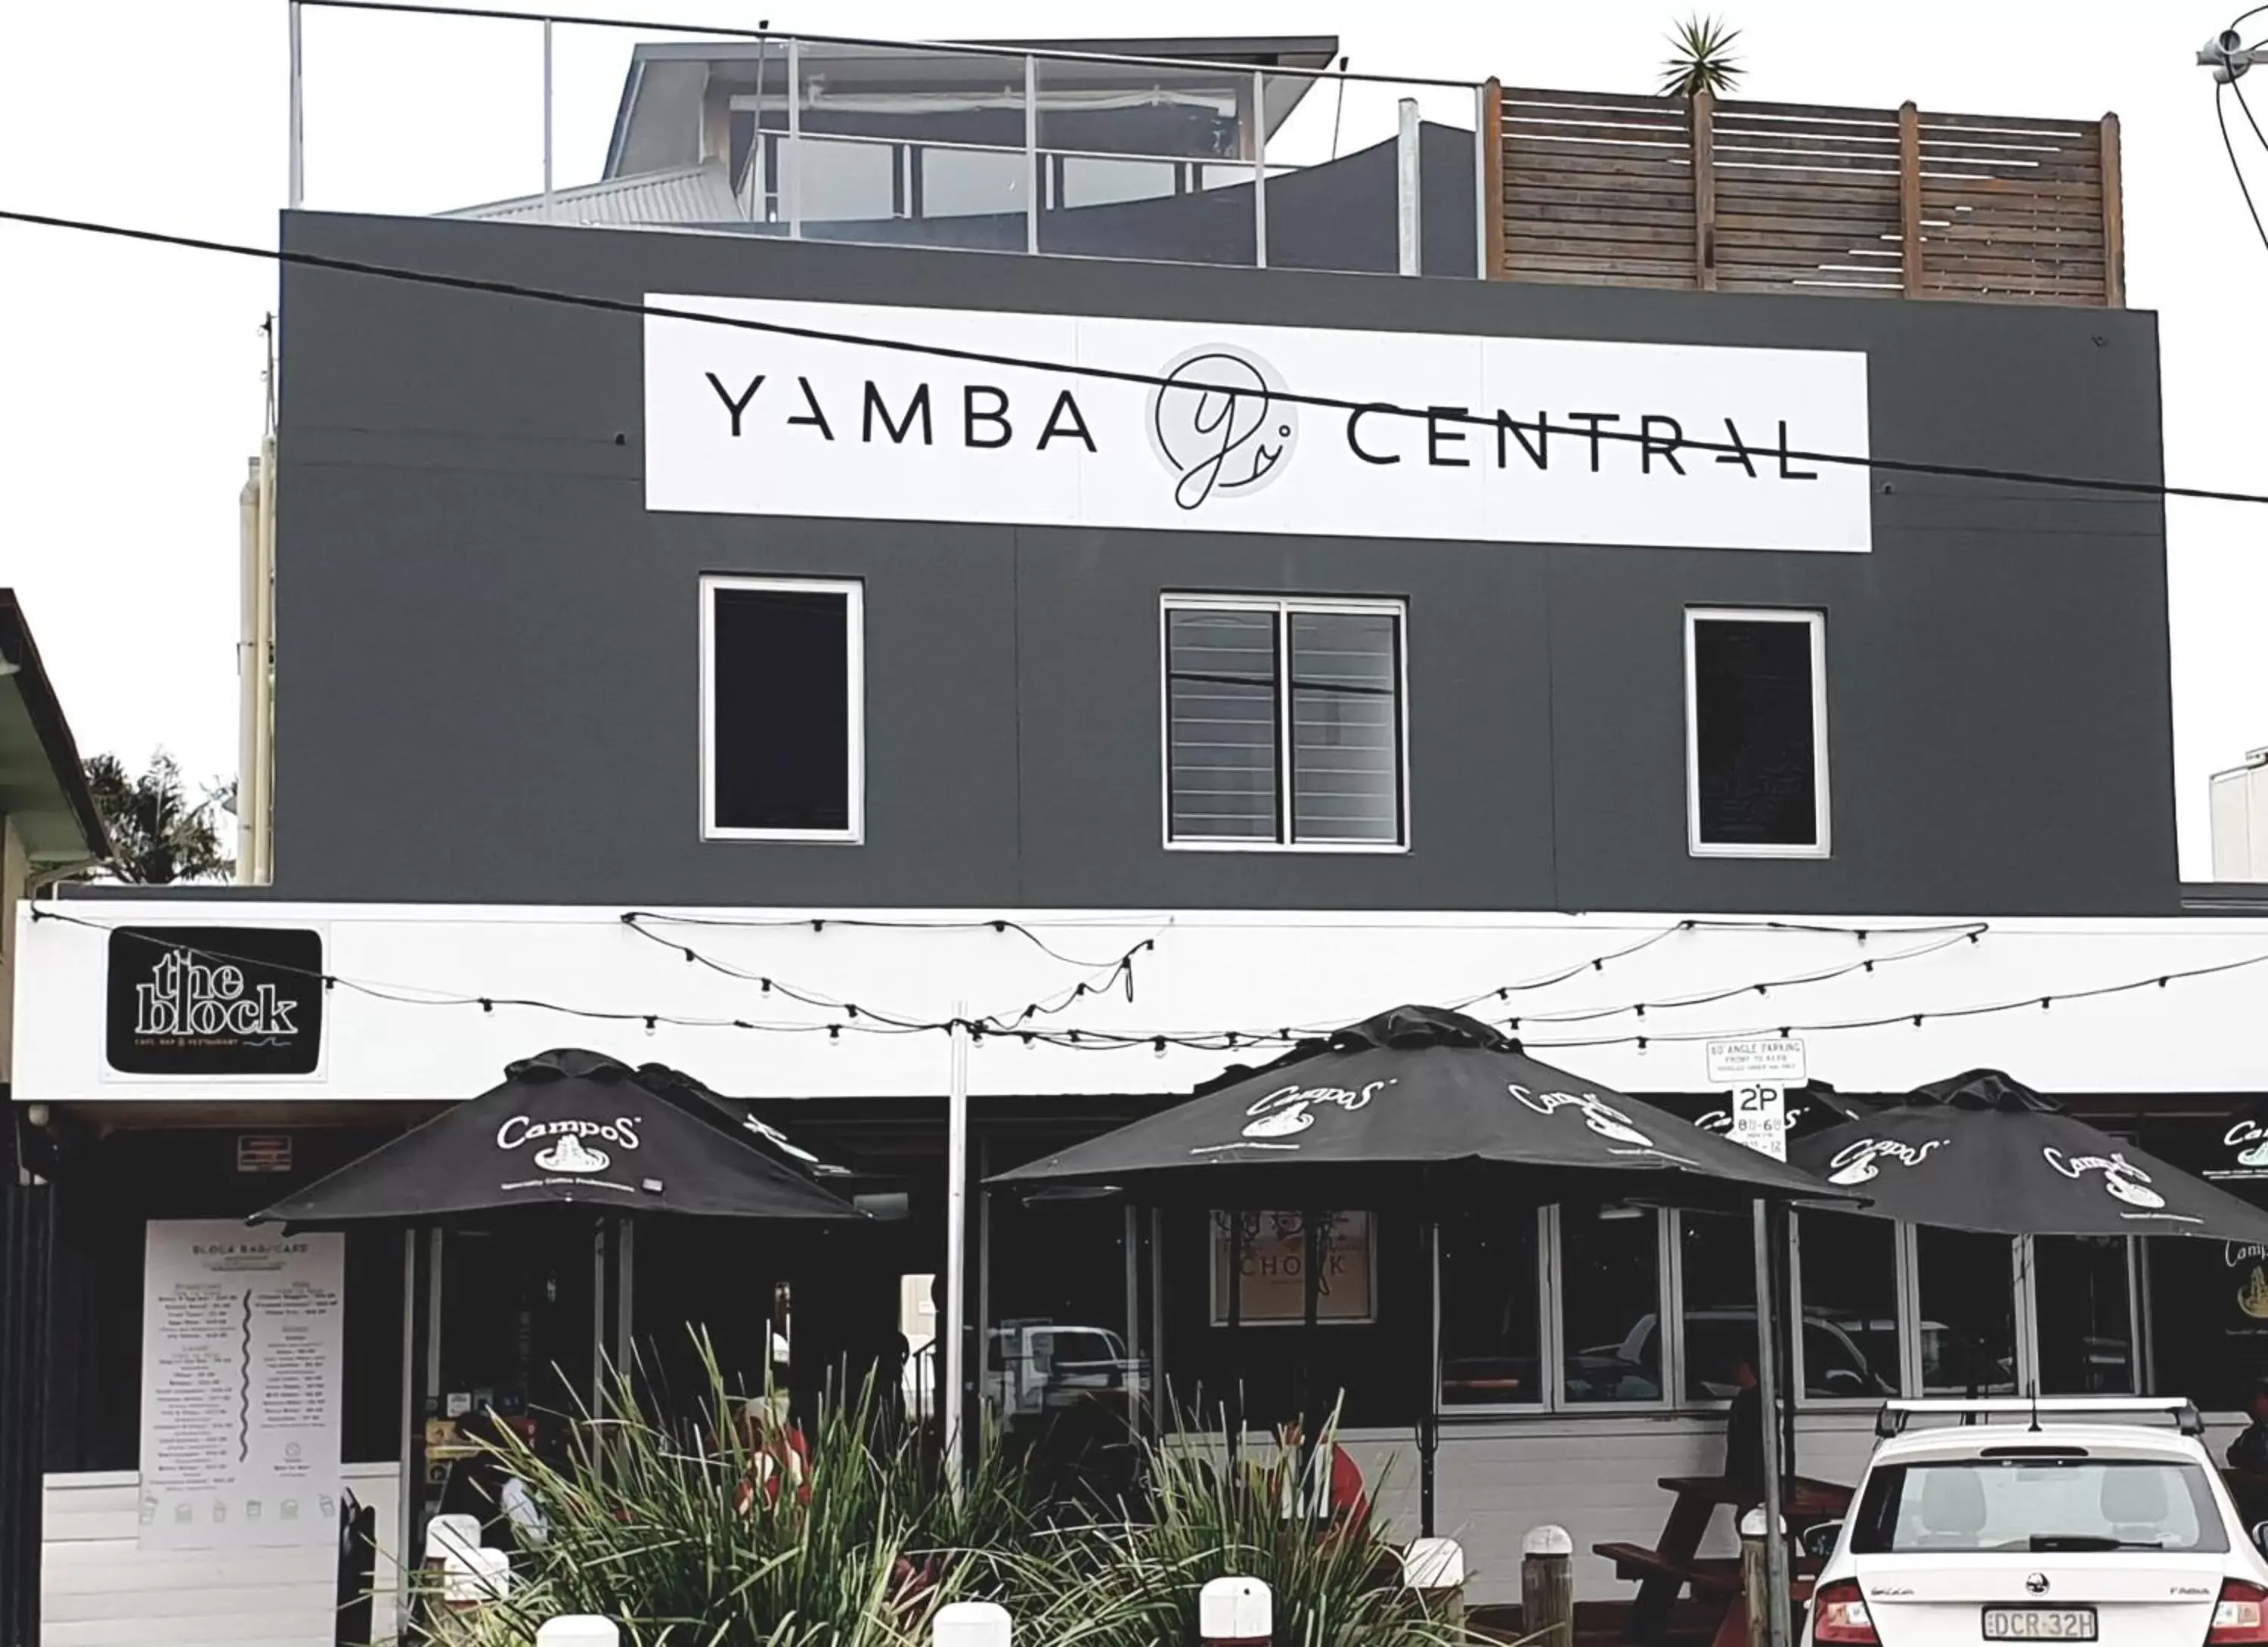 Property Building in Yamba Central